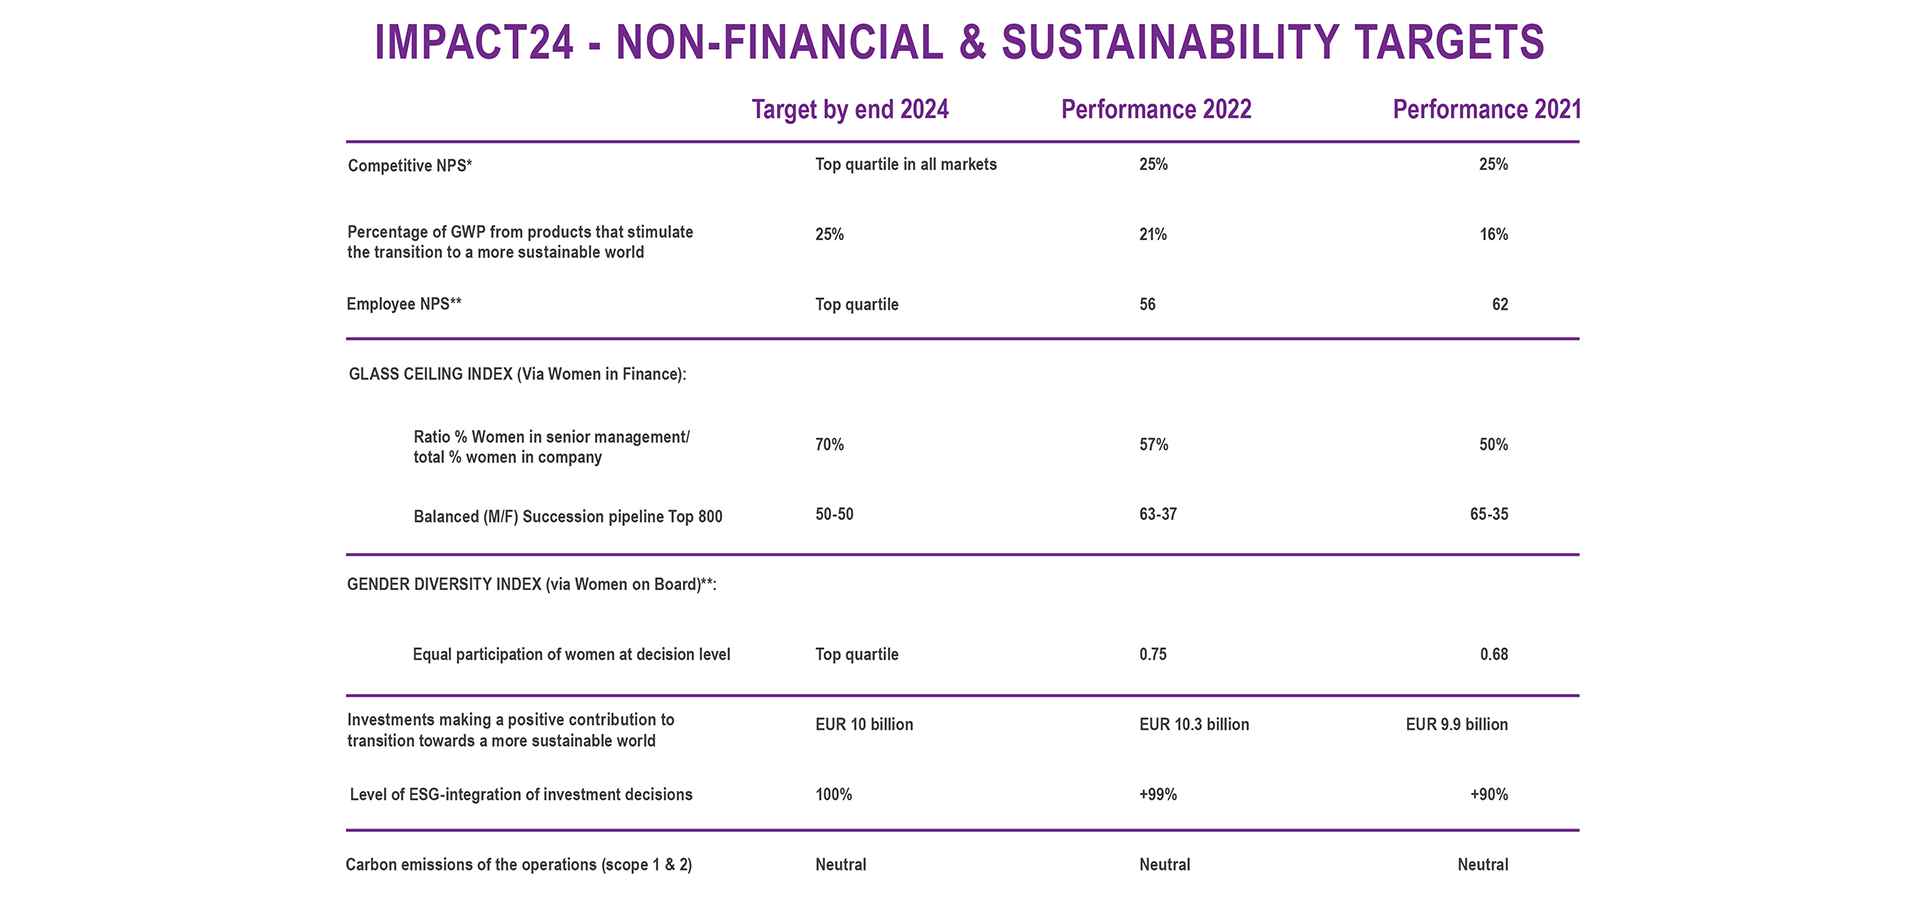 Table Non-financial and sustainability figures 